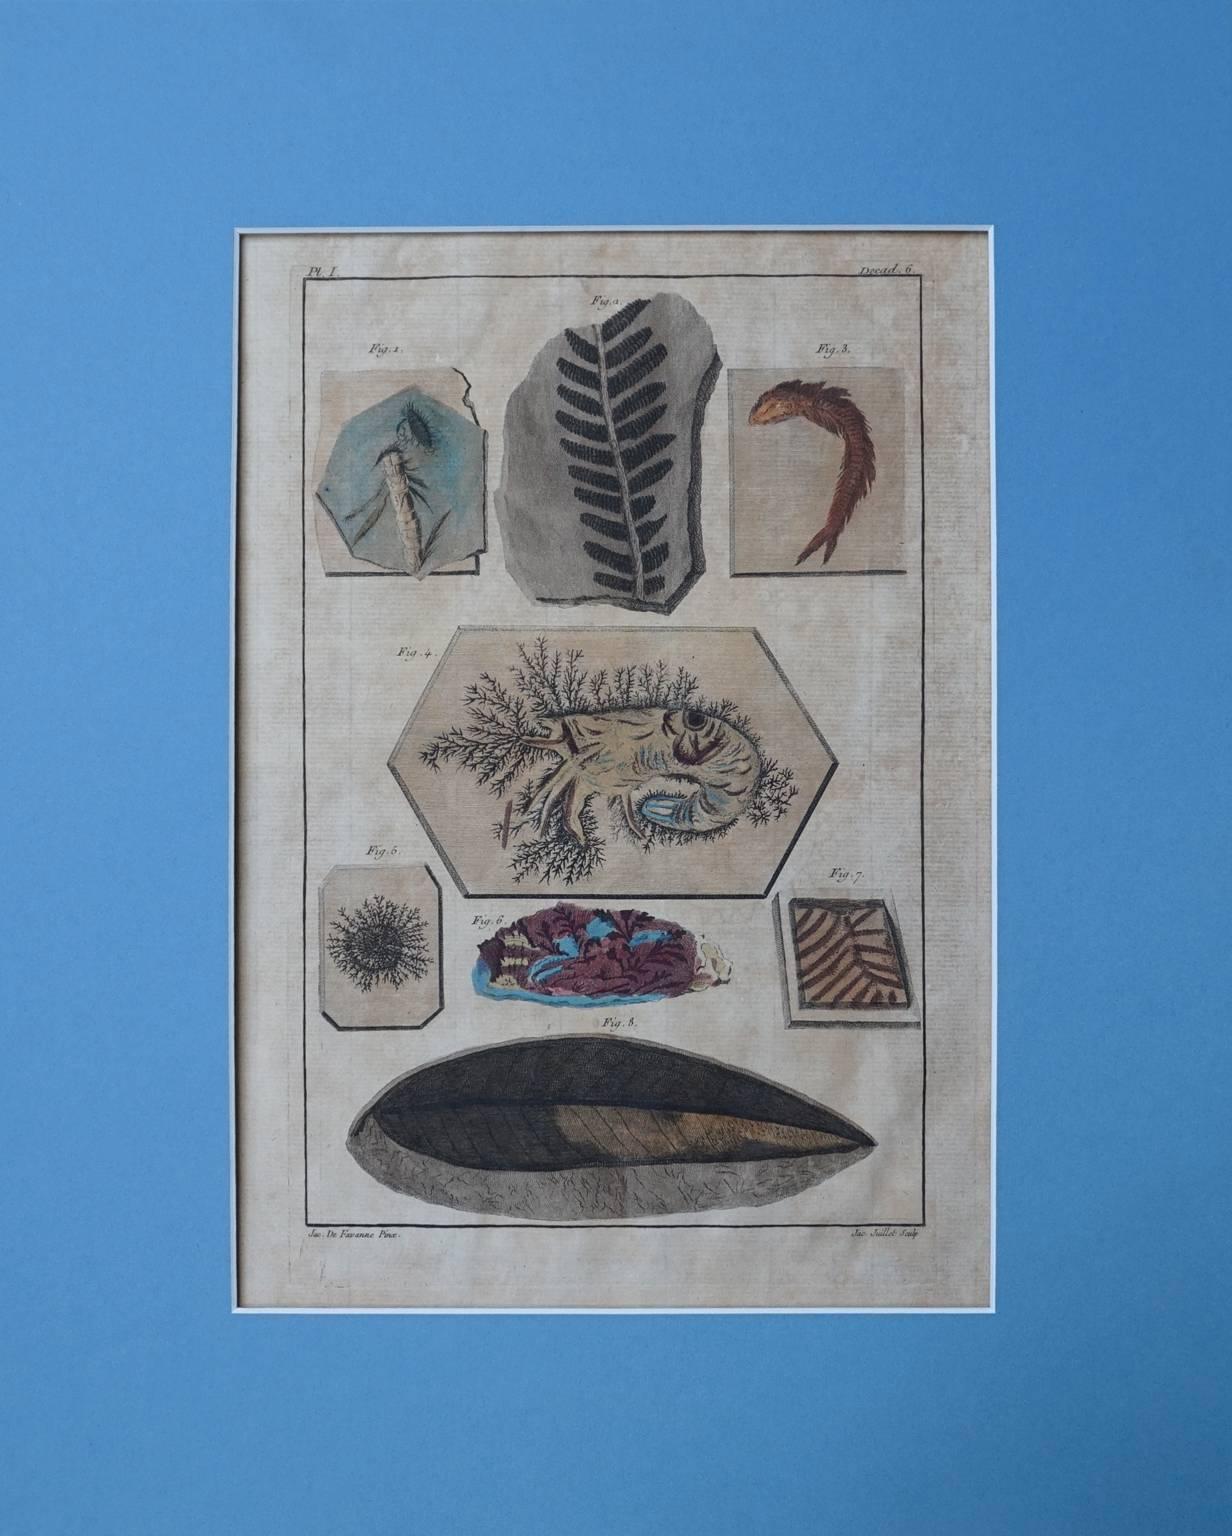 Complete set of ten paper hand-colored illustrations from Premiere Centurie de Planches Enluminees et Non Enluminees (Decade 6 Regne Mineral) by Pierre Joseph Buchoz, Paris and Amsterdam 1775-1781, all with contemporary hand colouring. 
The paper